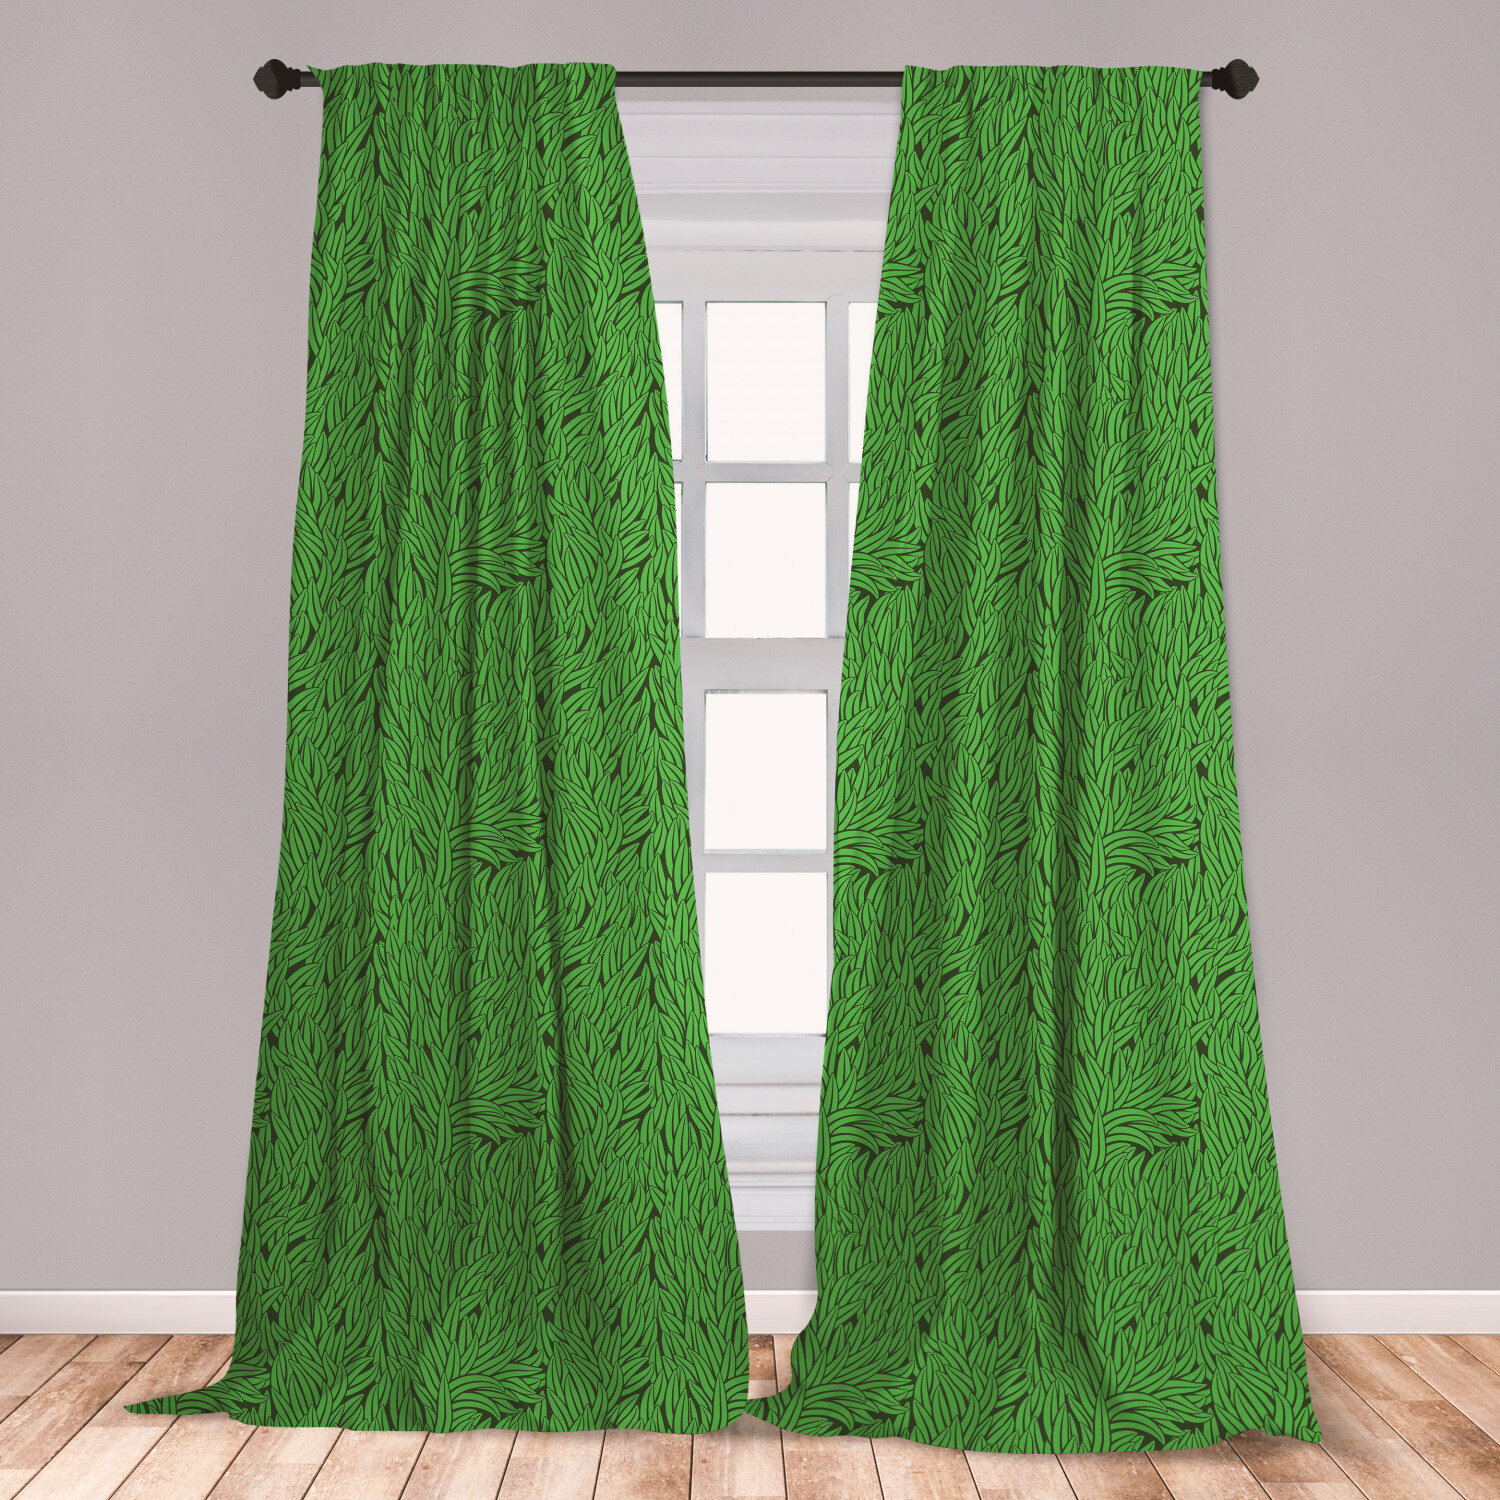 East Urban Home Ambesonne Green Curtains Hand Drawn Style Grass